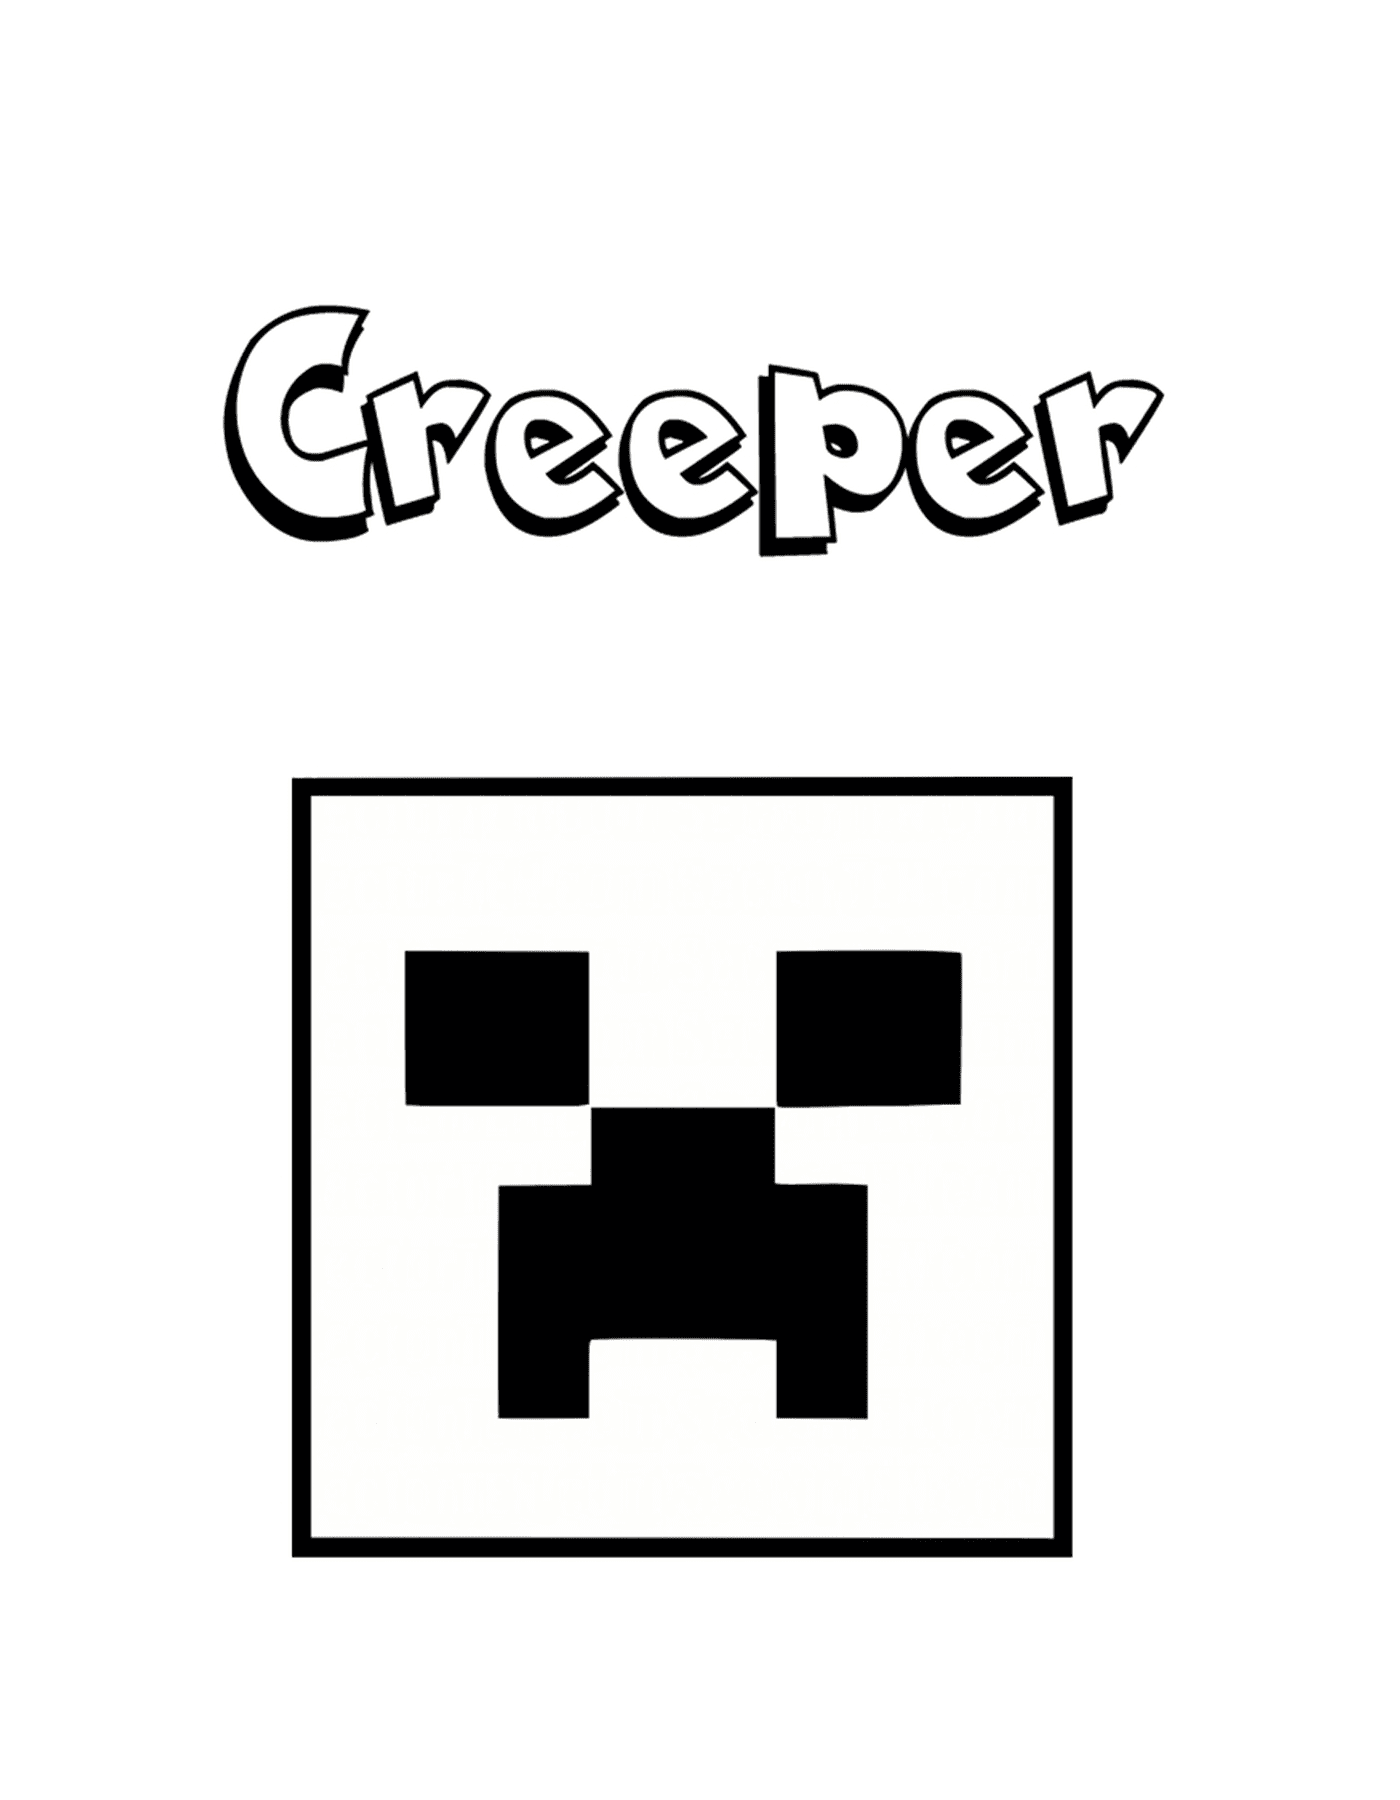  Creeper's iconic face 